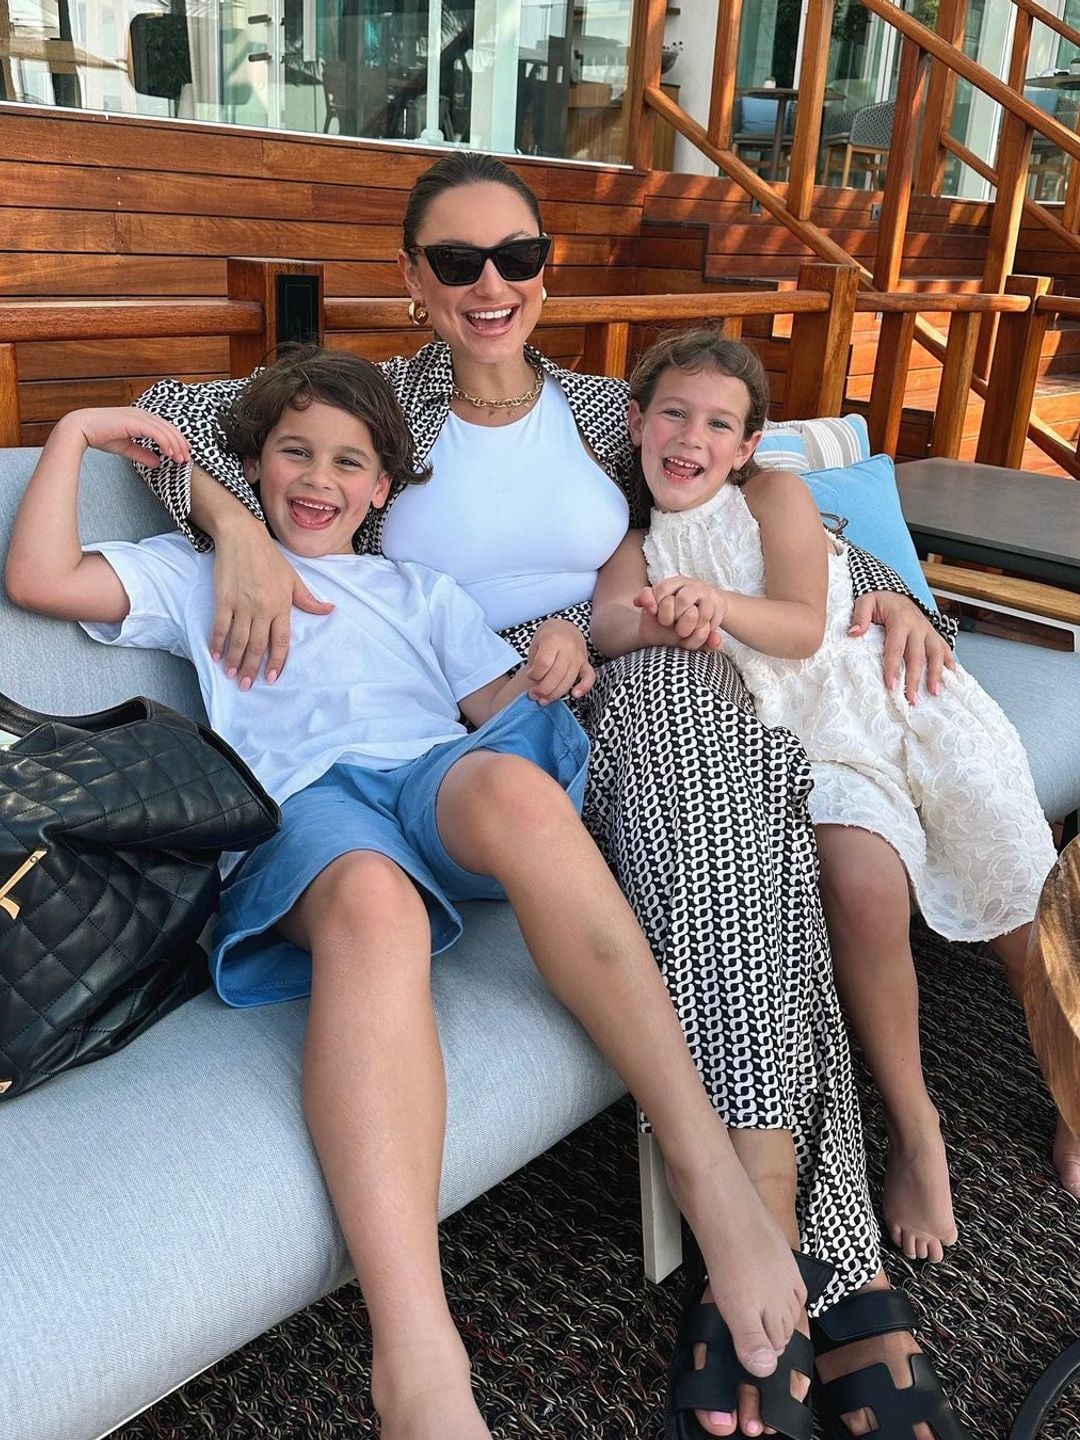 Sam Faiers in sunglasses as she cuddles her two eldest kids in Dubai